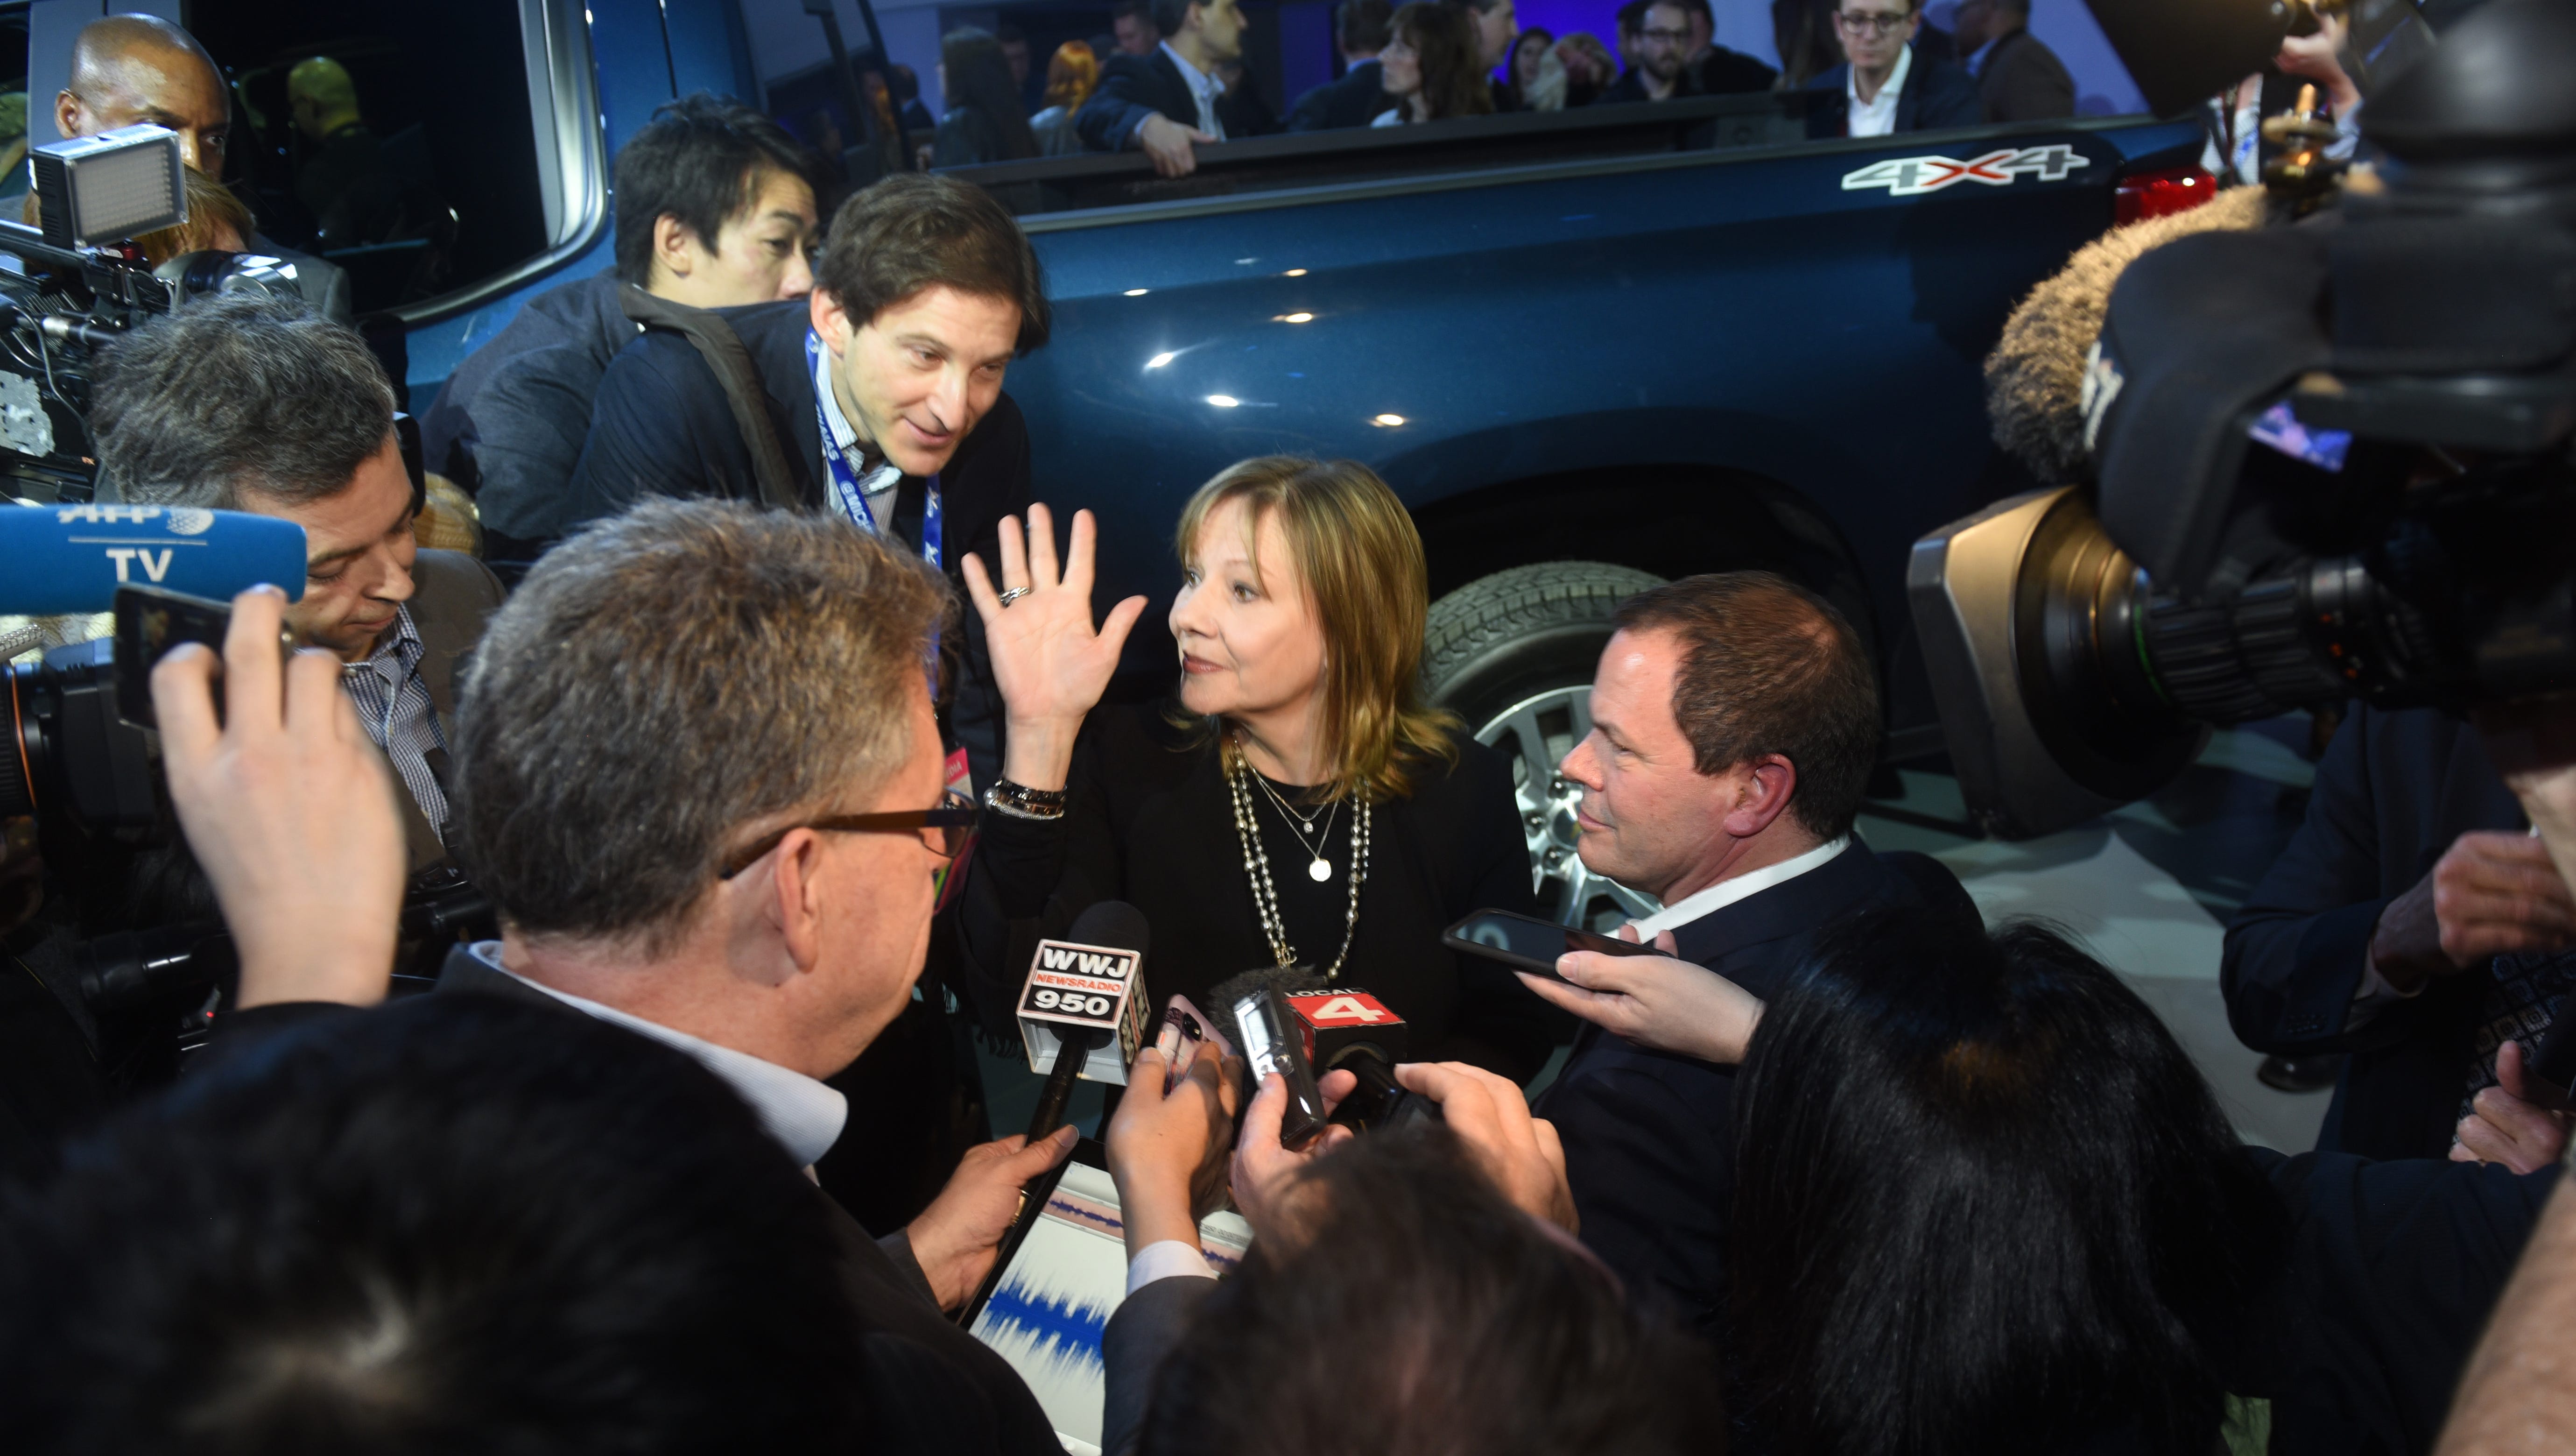 General Motors CEO Mary Barra speaks to the media at the Silverado event.